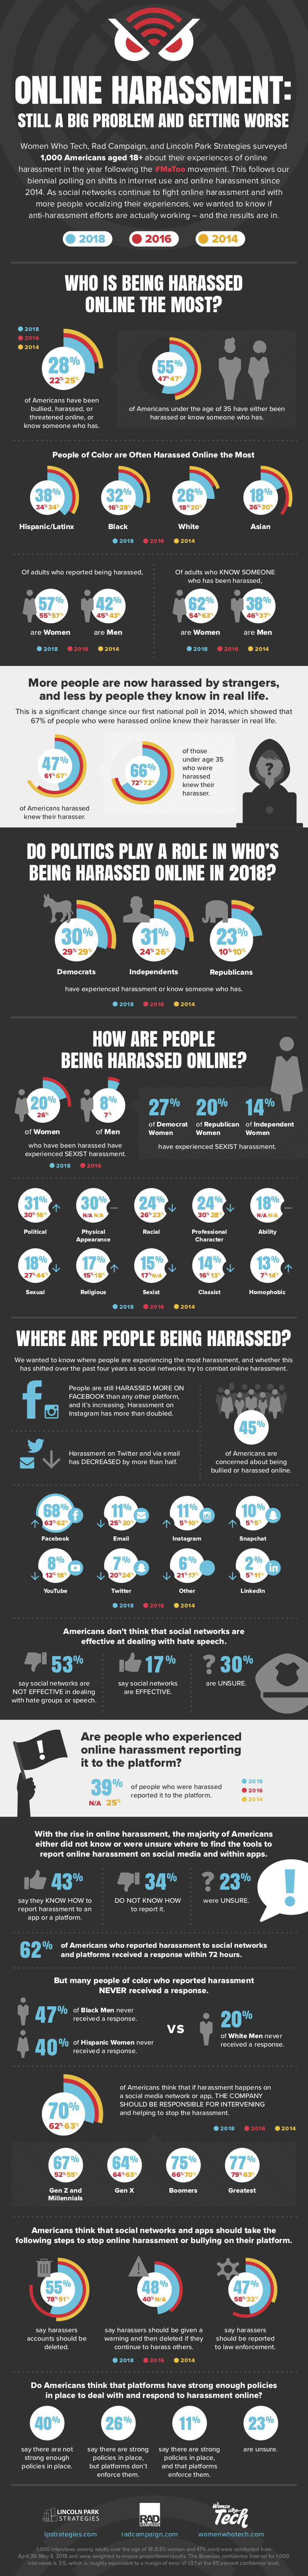 Online Harassment: Still a Big Problem and Getting Worse